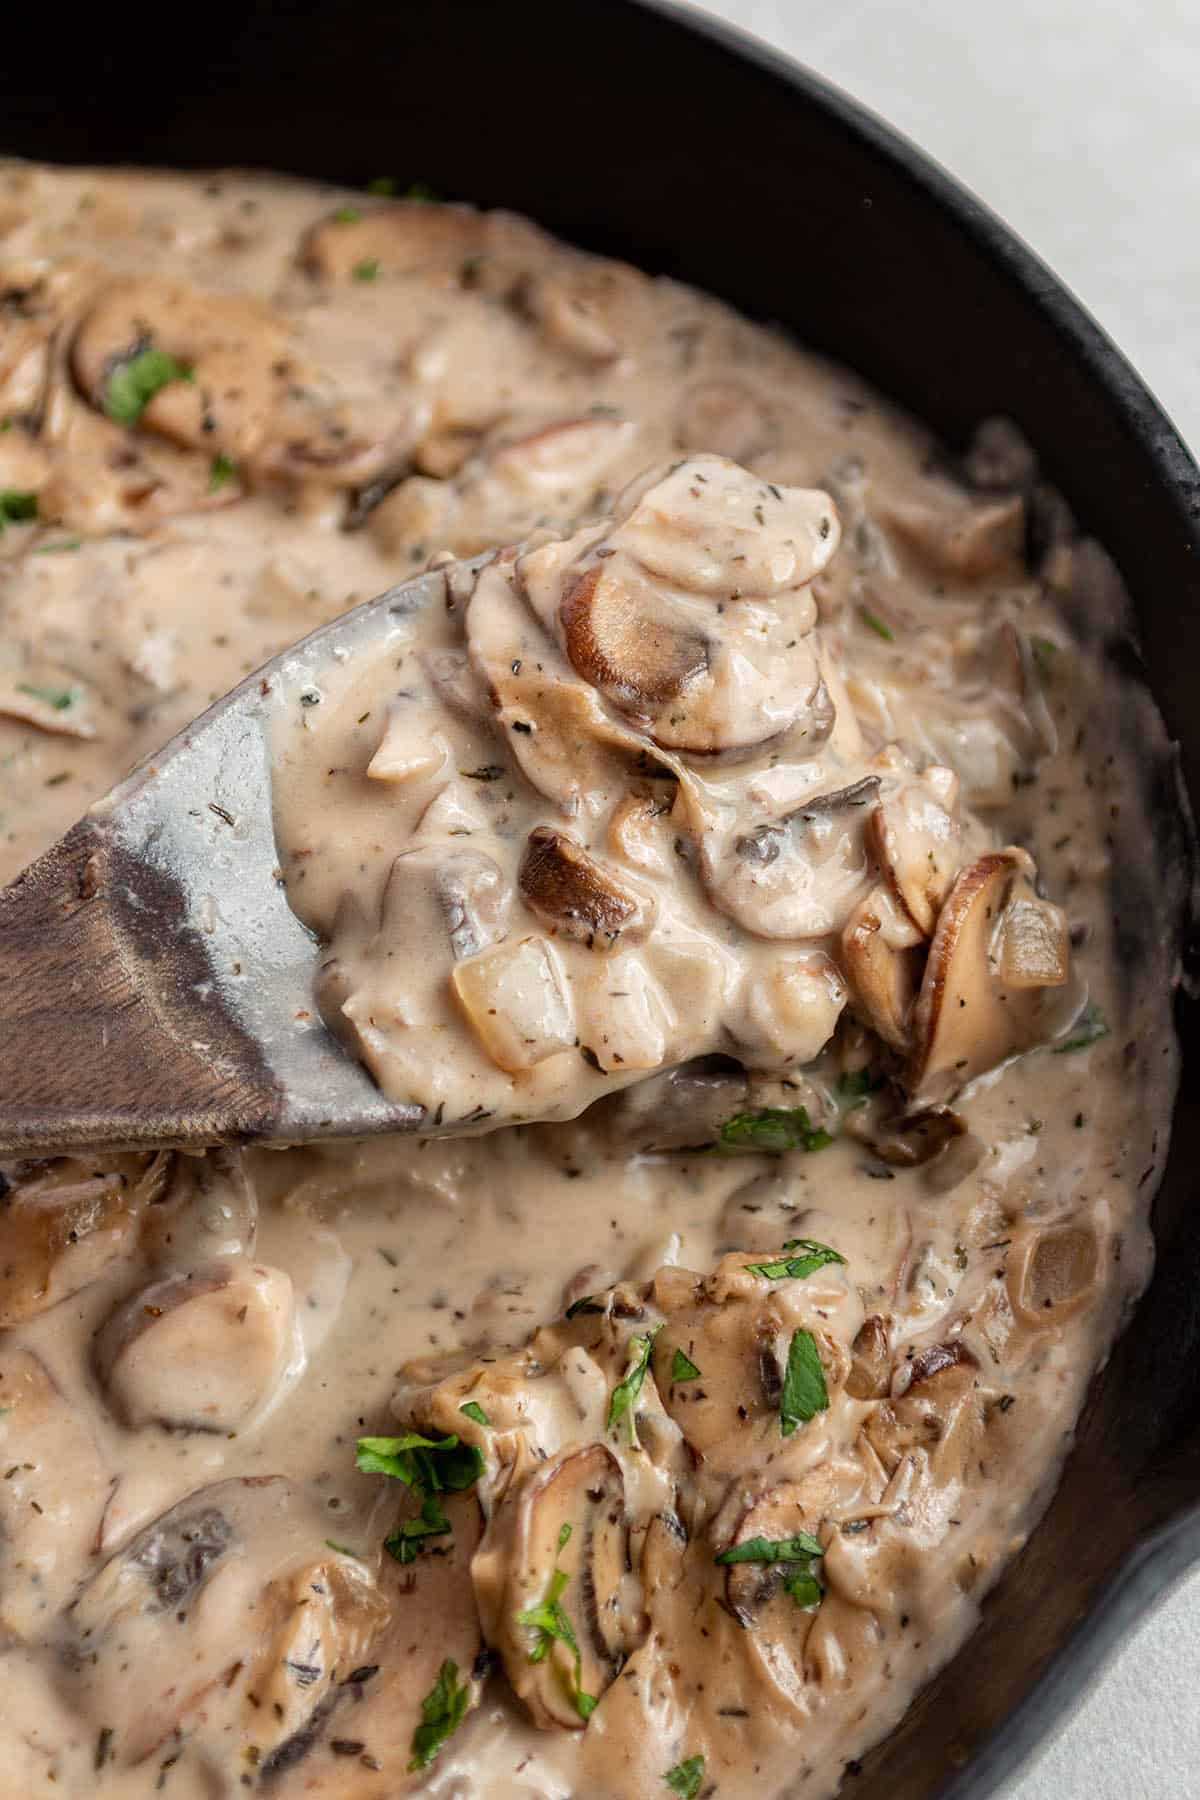 A cast iron skillet with a mushroom sauce and a wooden spoon scooping some out.